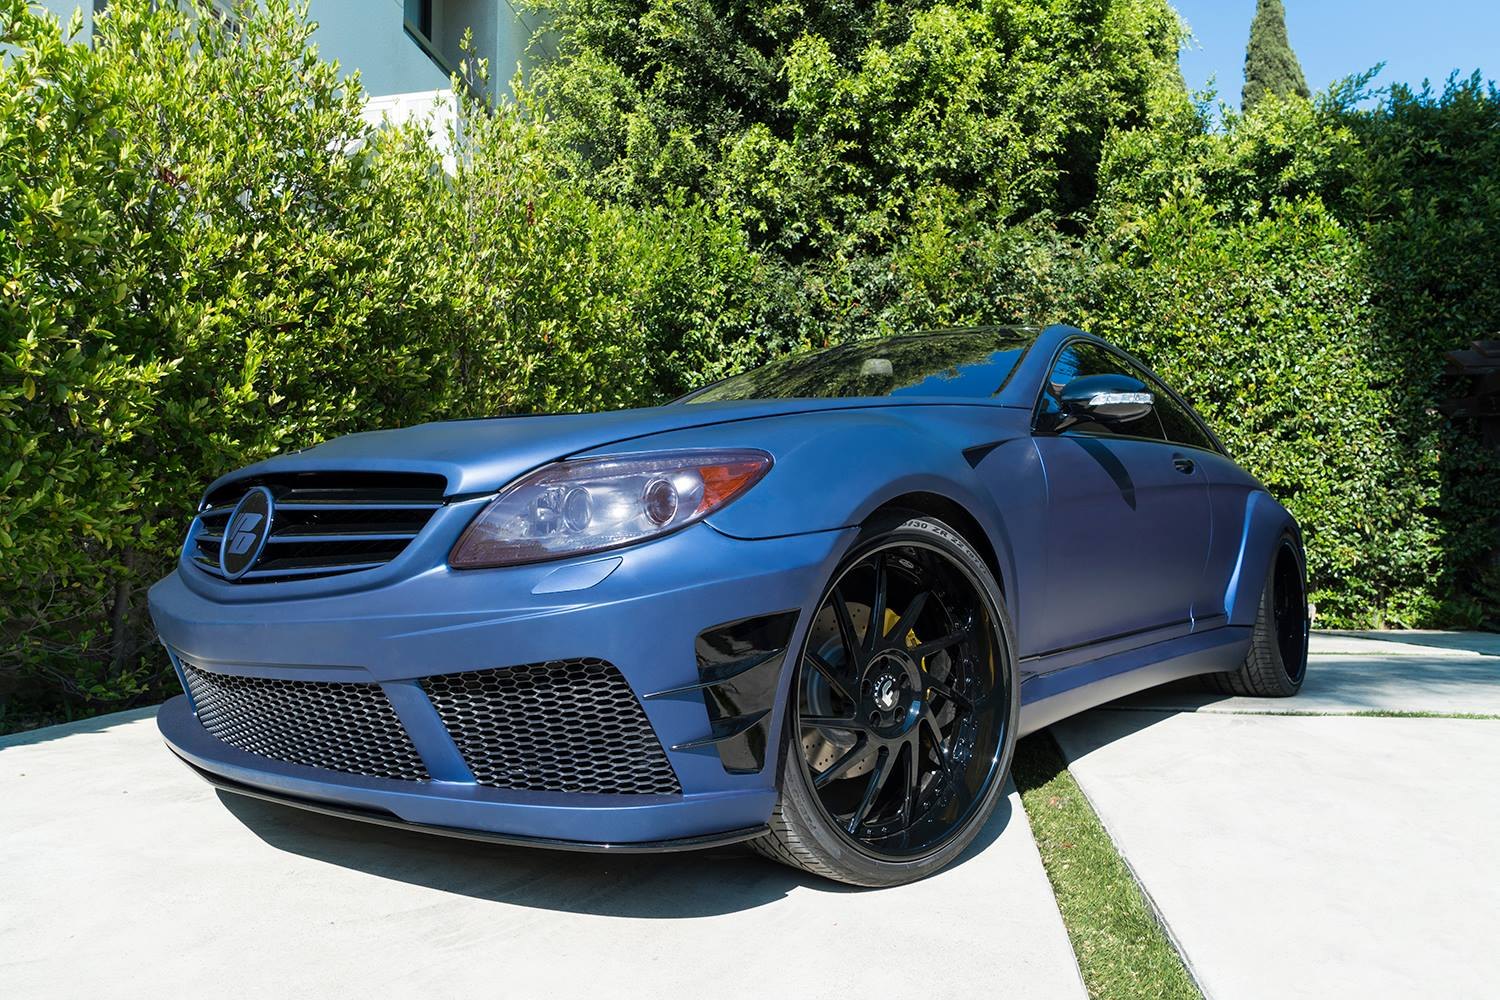 Matte Blue Mercedes CL Class with Custom Front Bumper - Photo by Forgiato